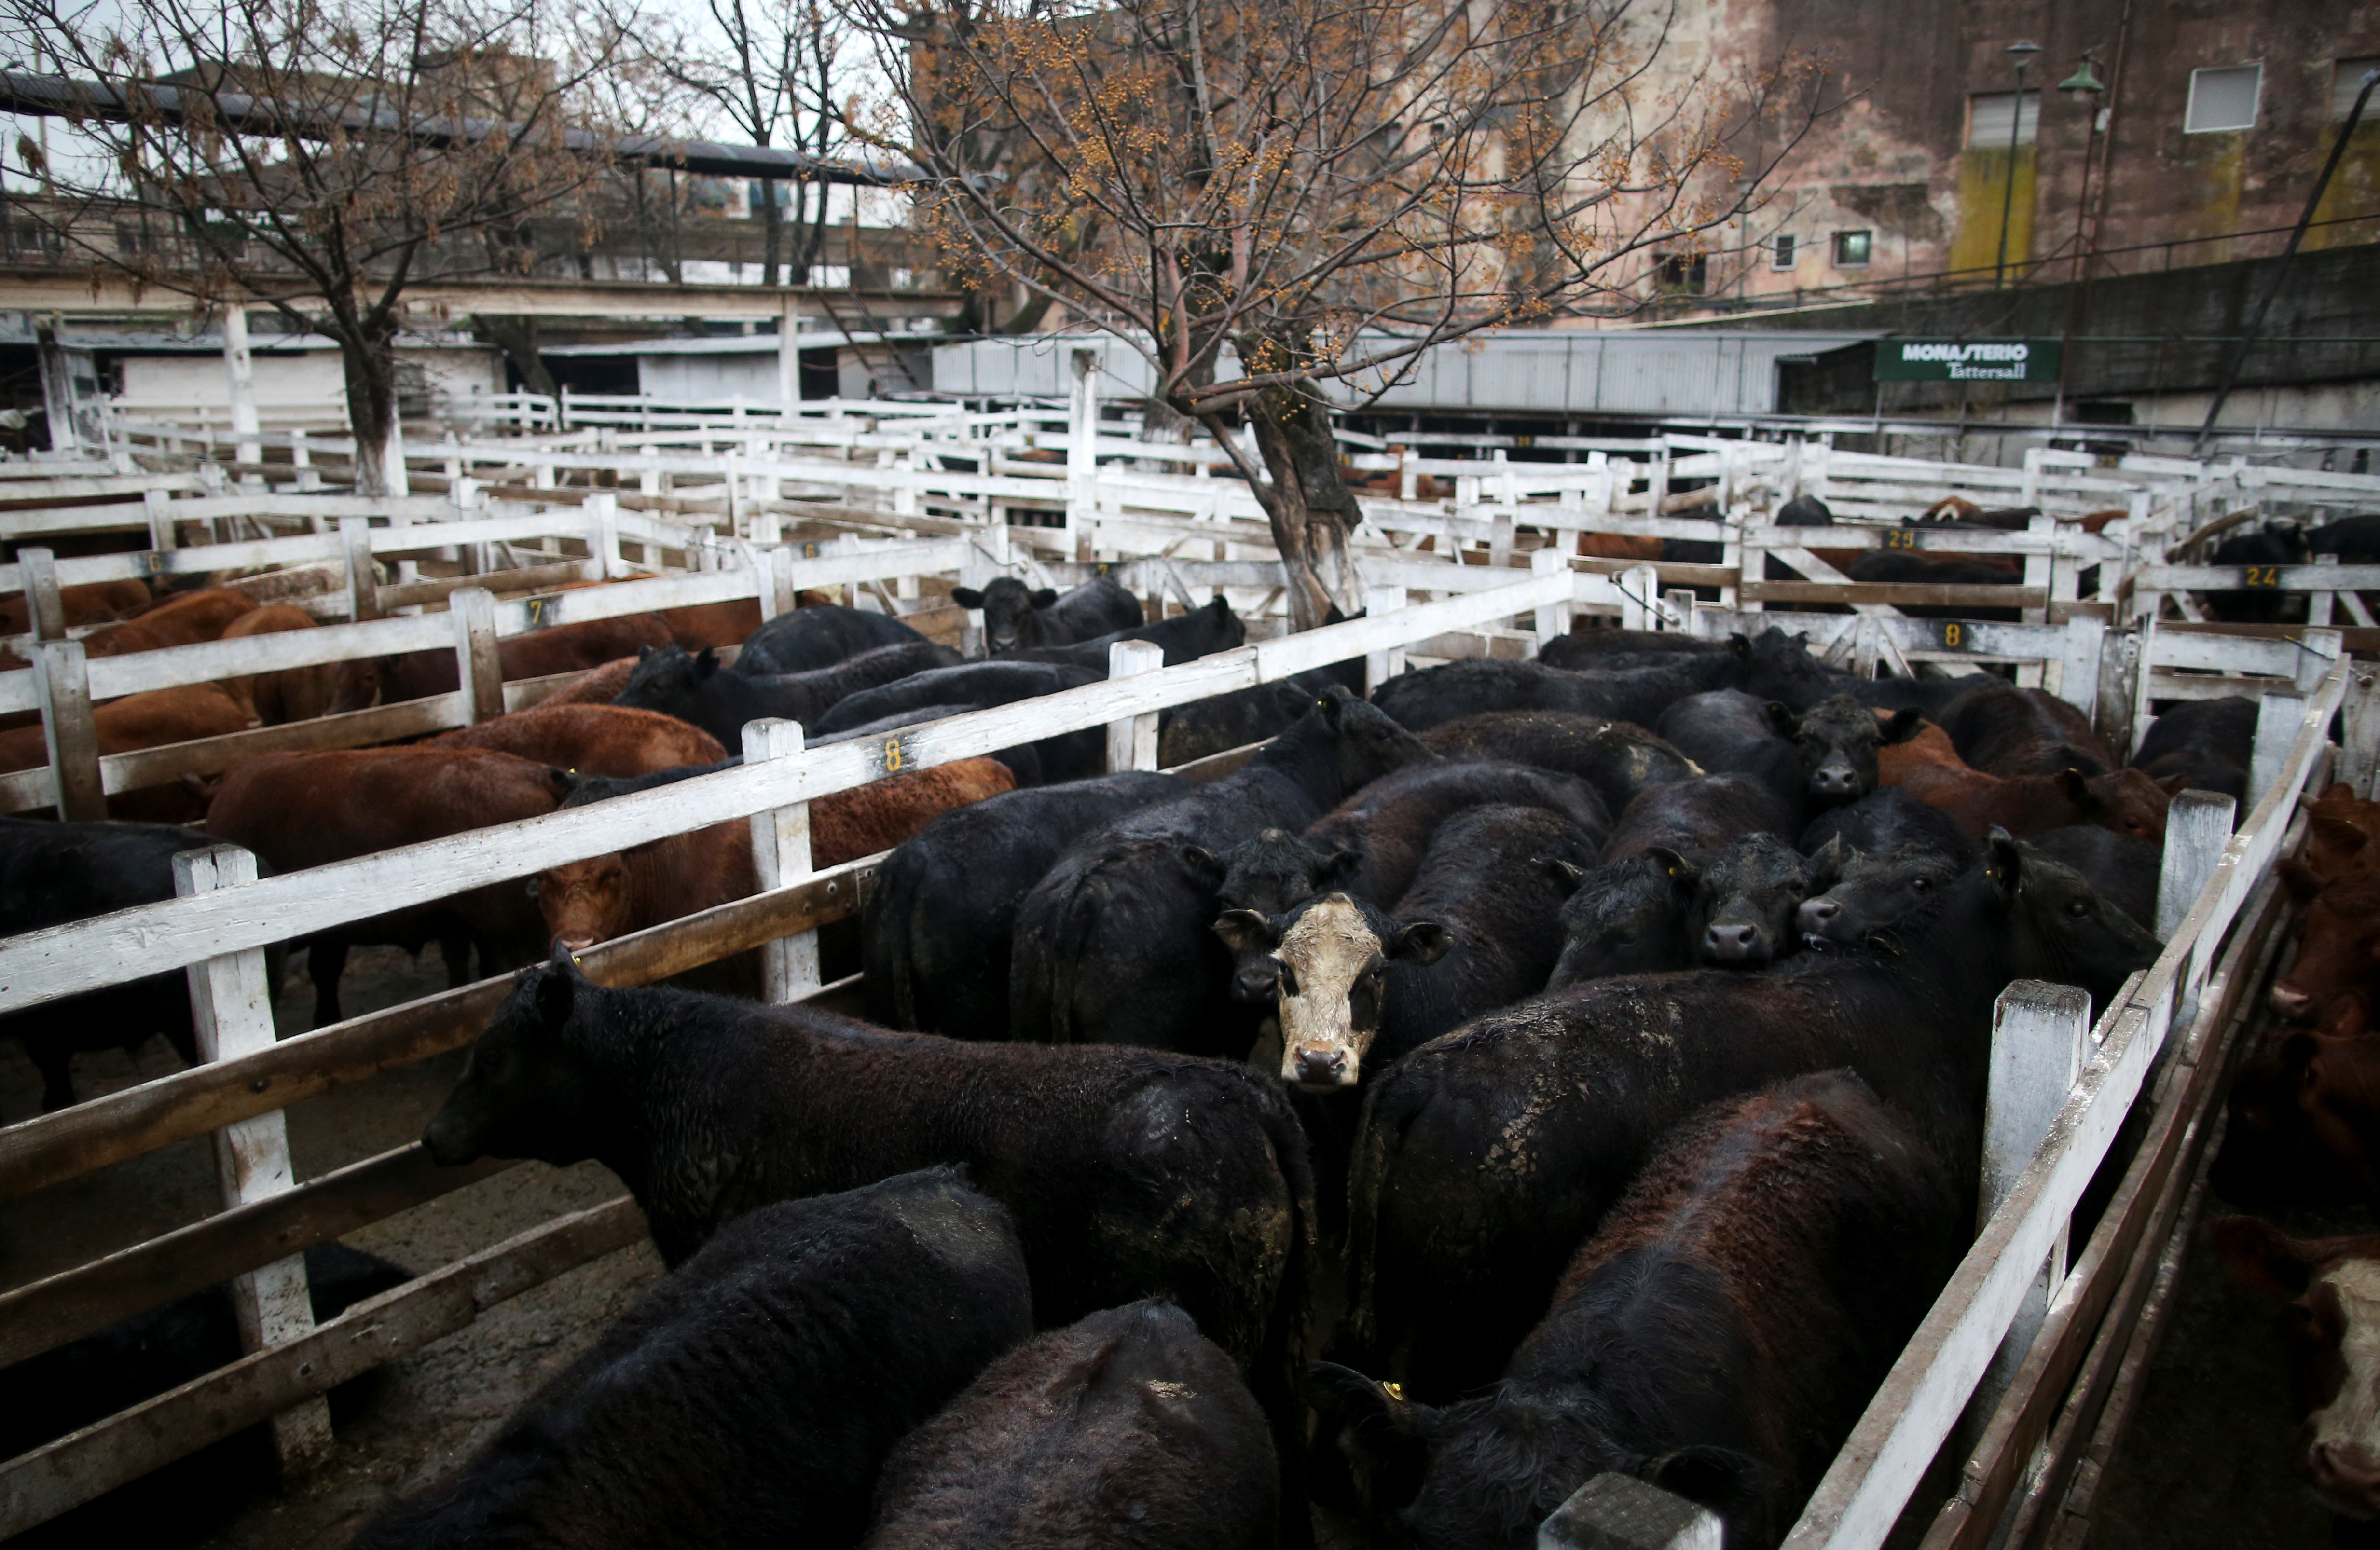 Cattle for sale are seen inside corrals at the Liniers market, in Buenos Aires